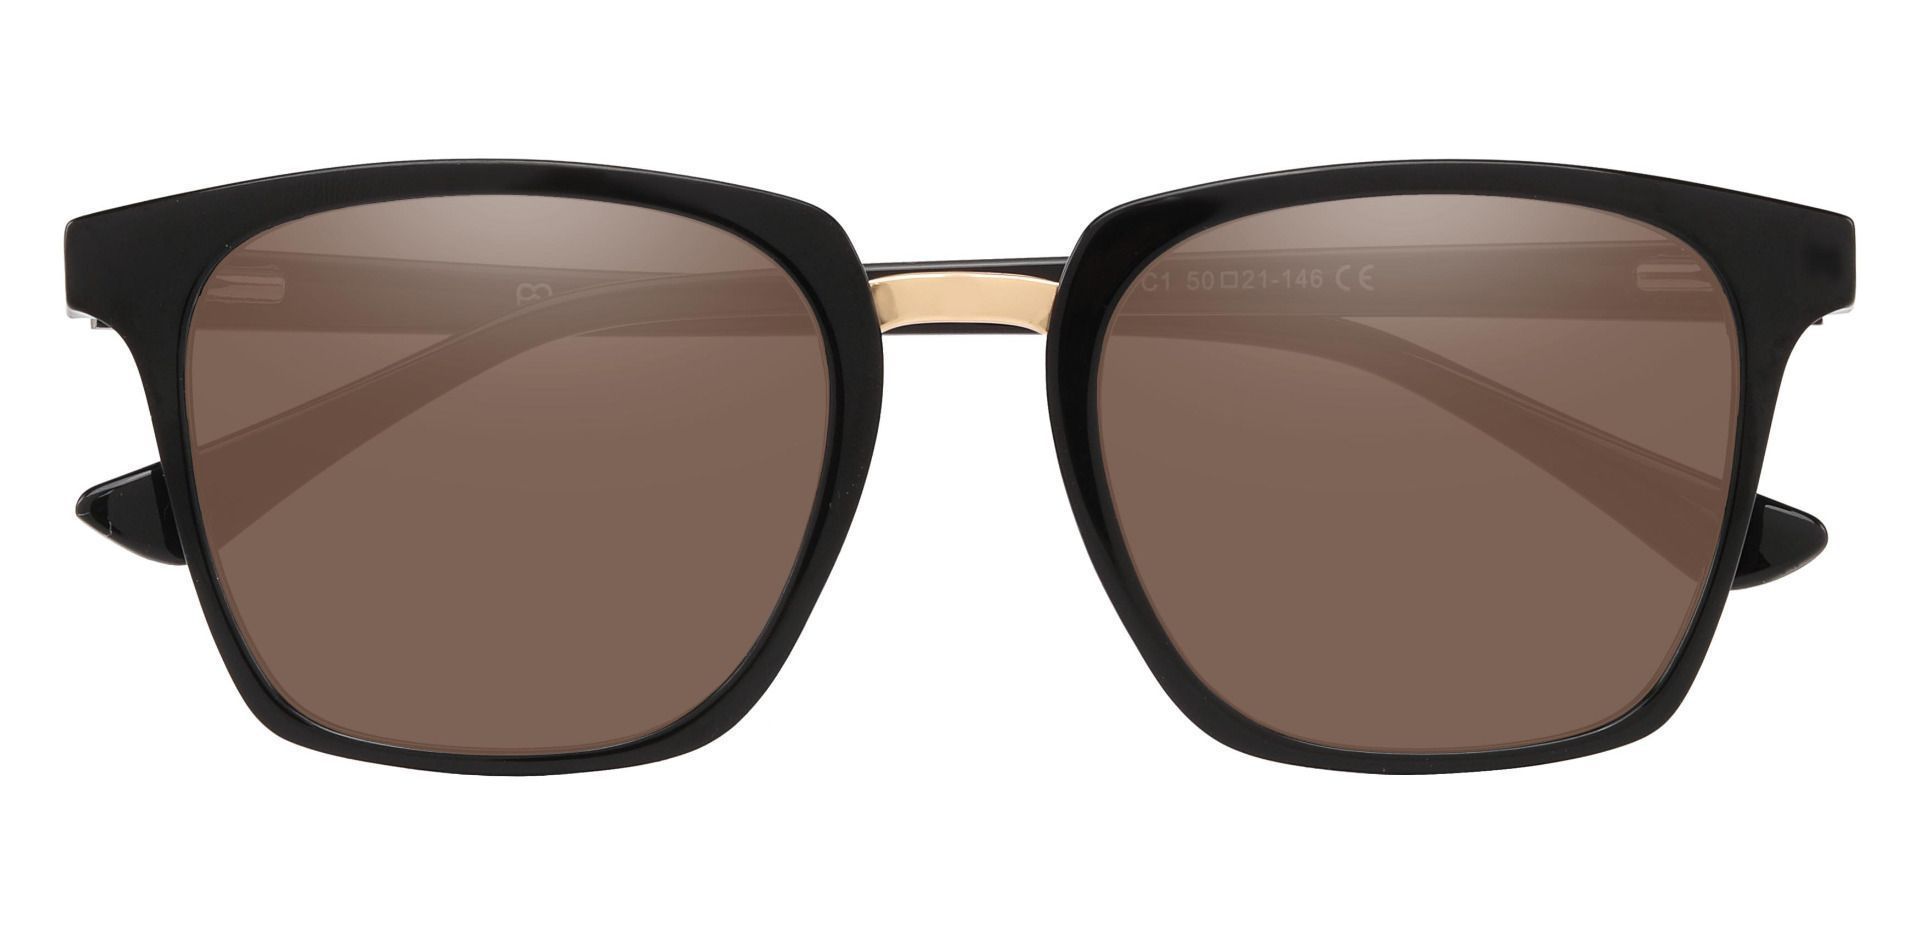 Delta Square Lined Bifocal Sunglasses - Black Frame With Brown Lenses